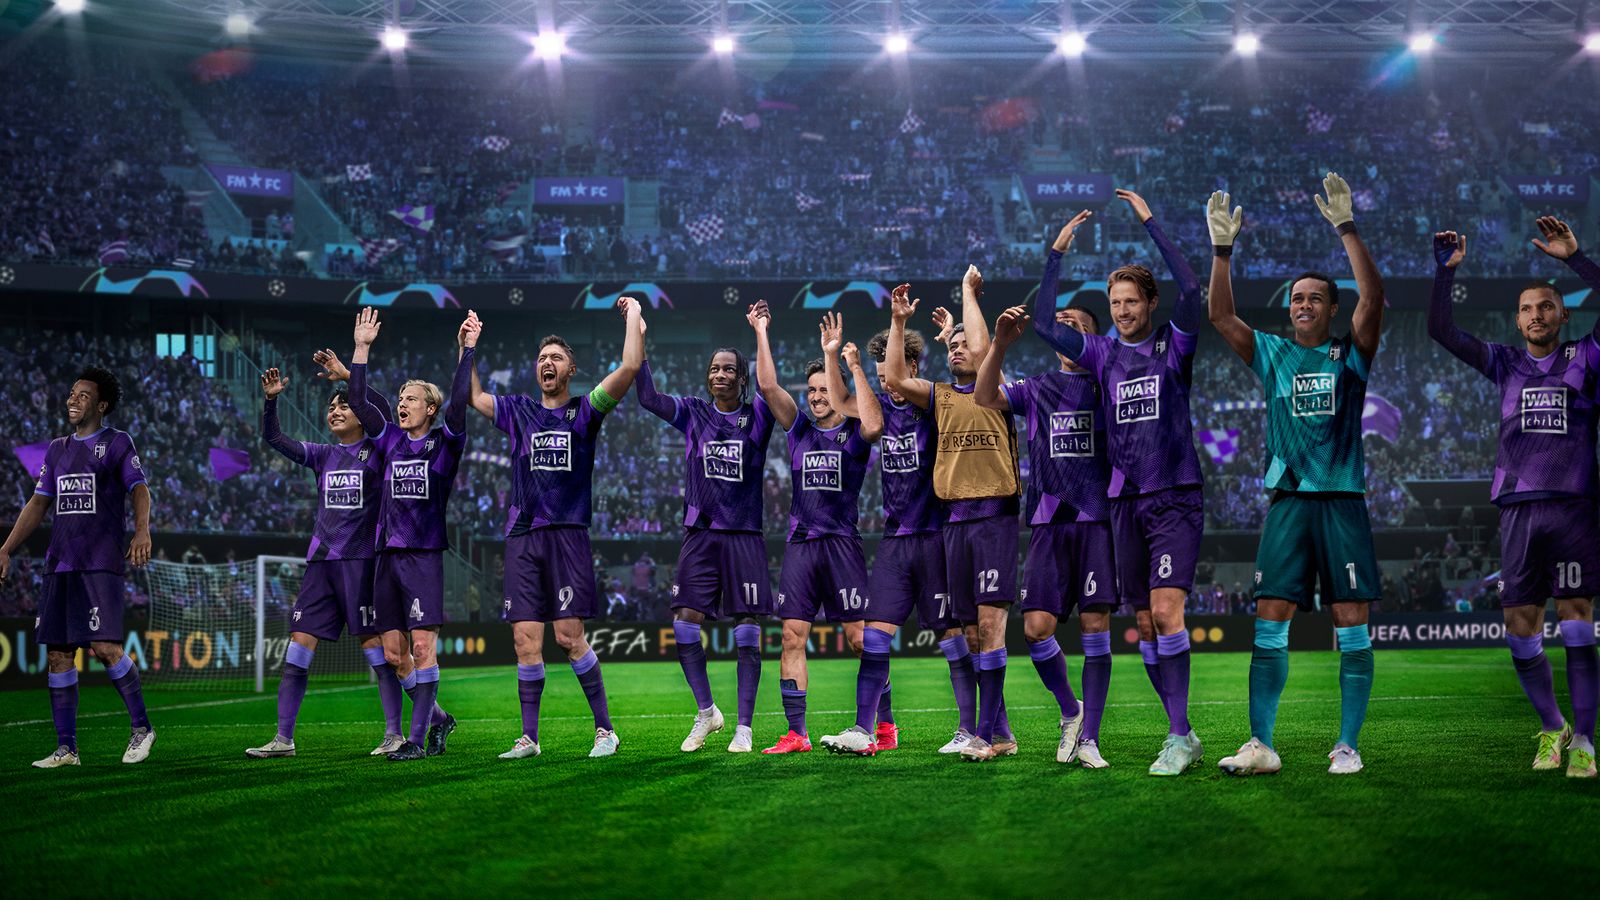 Football Manager Hero Art of a team wearing purple celebrating on a pitch.